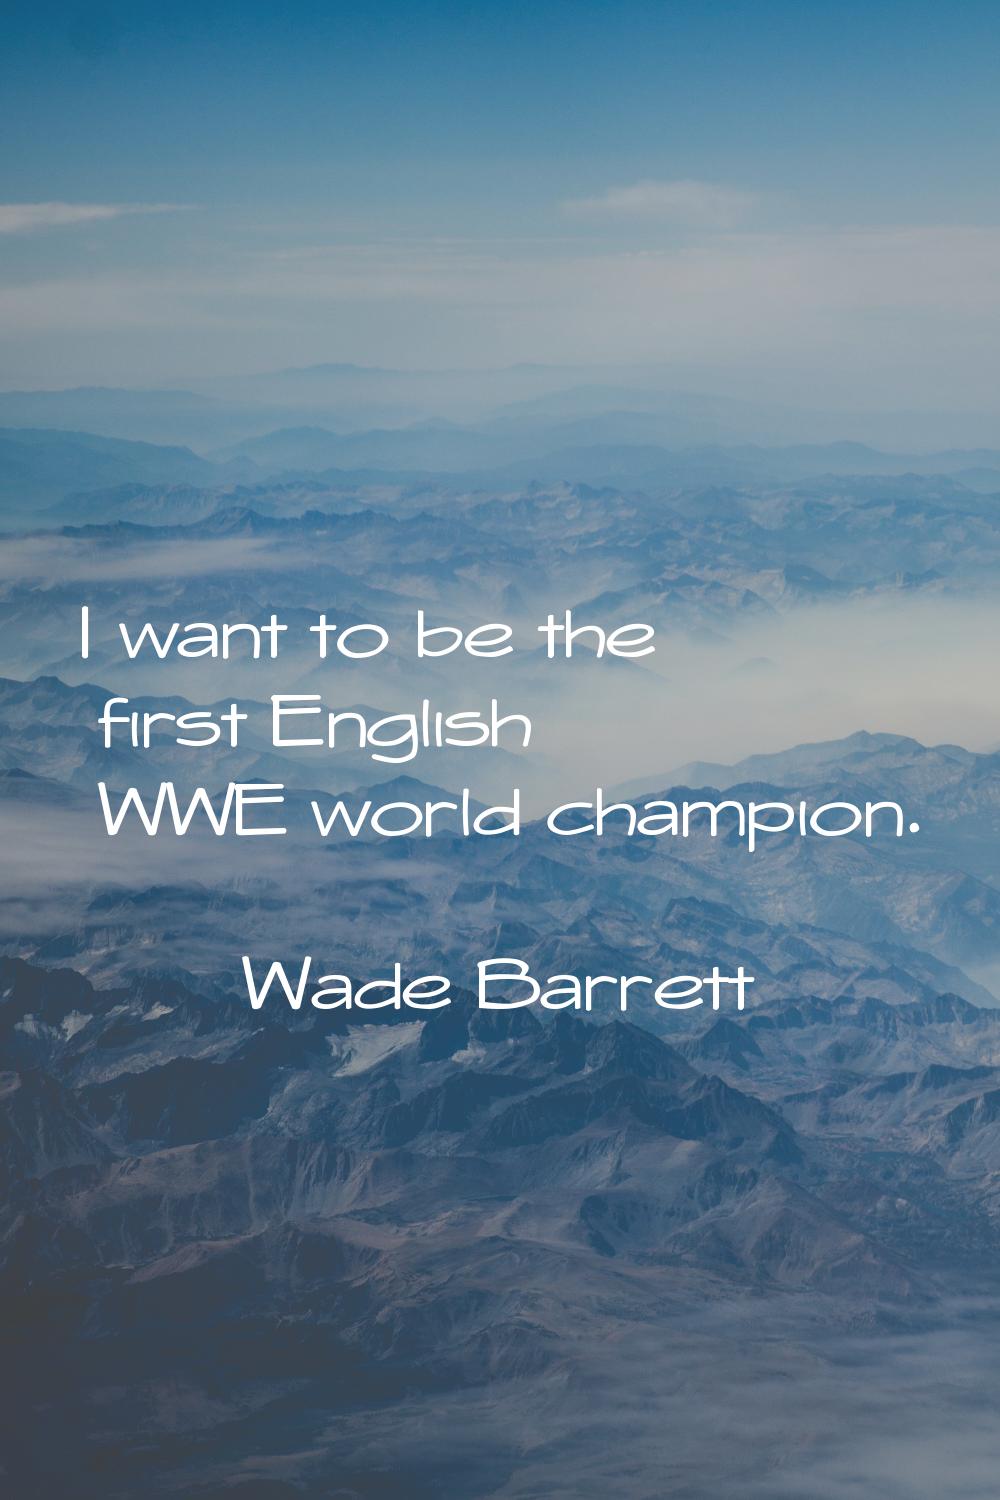 I want to be the first English WWE world champion.